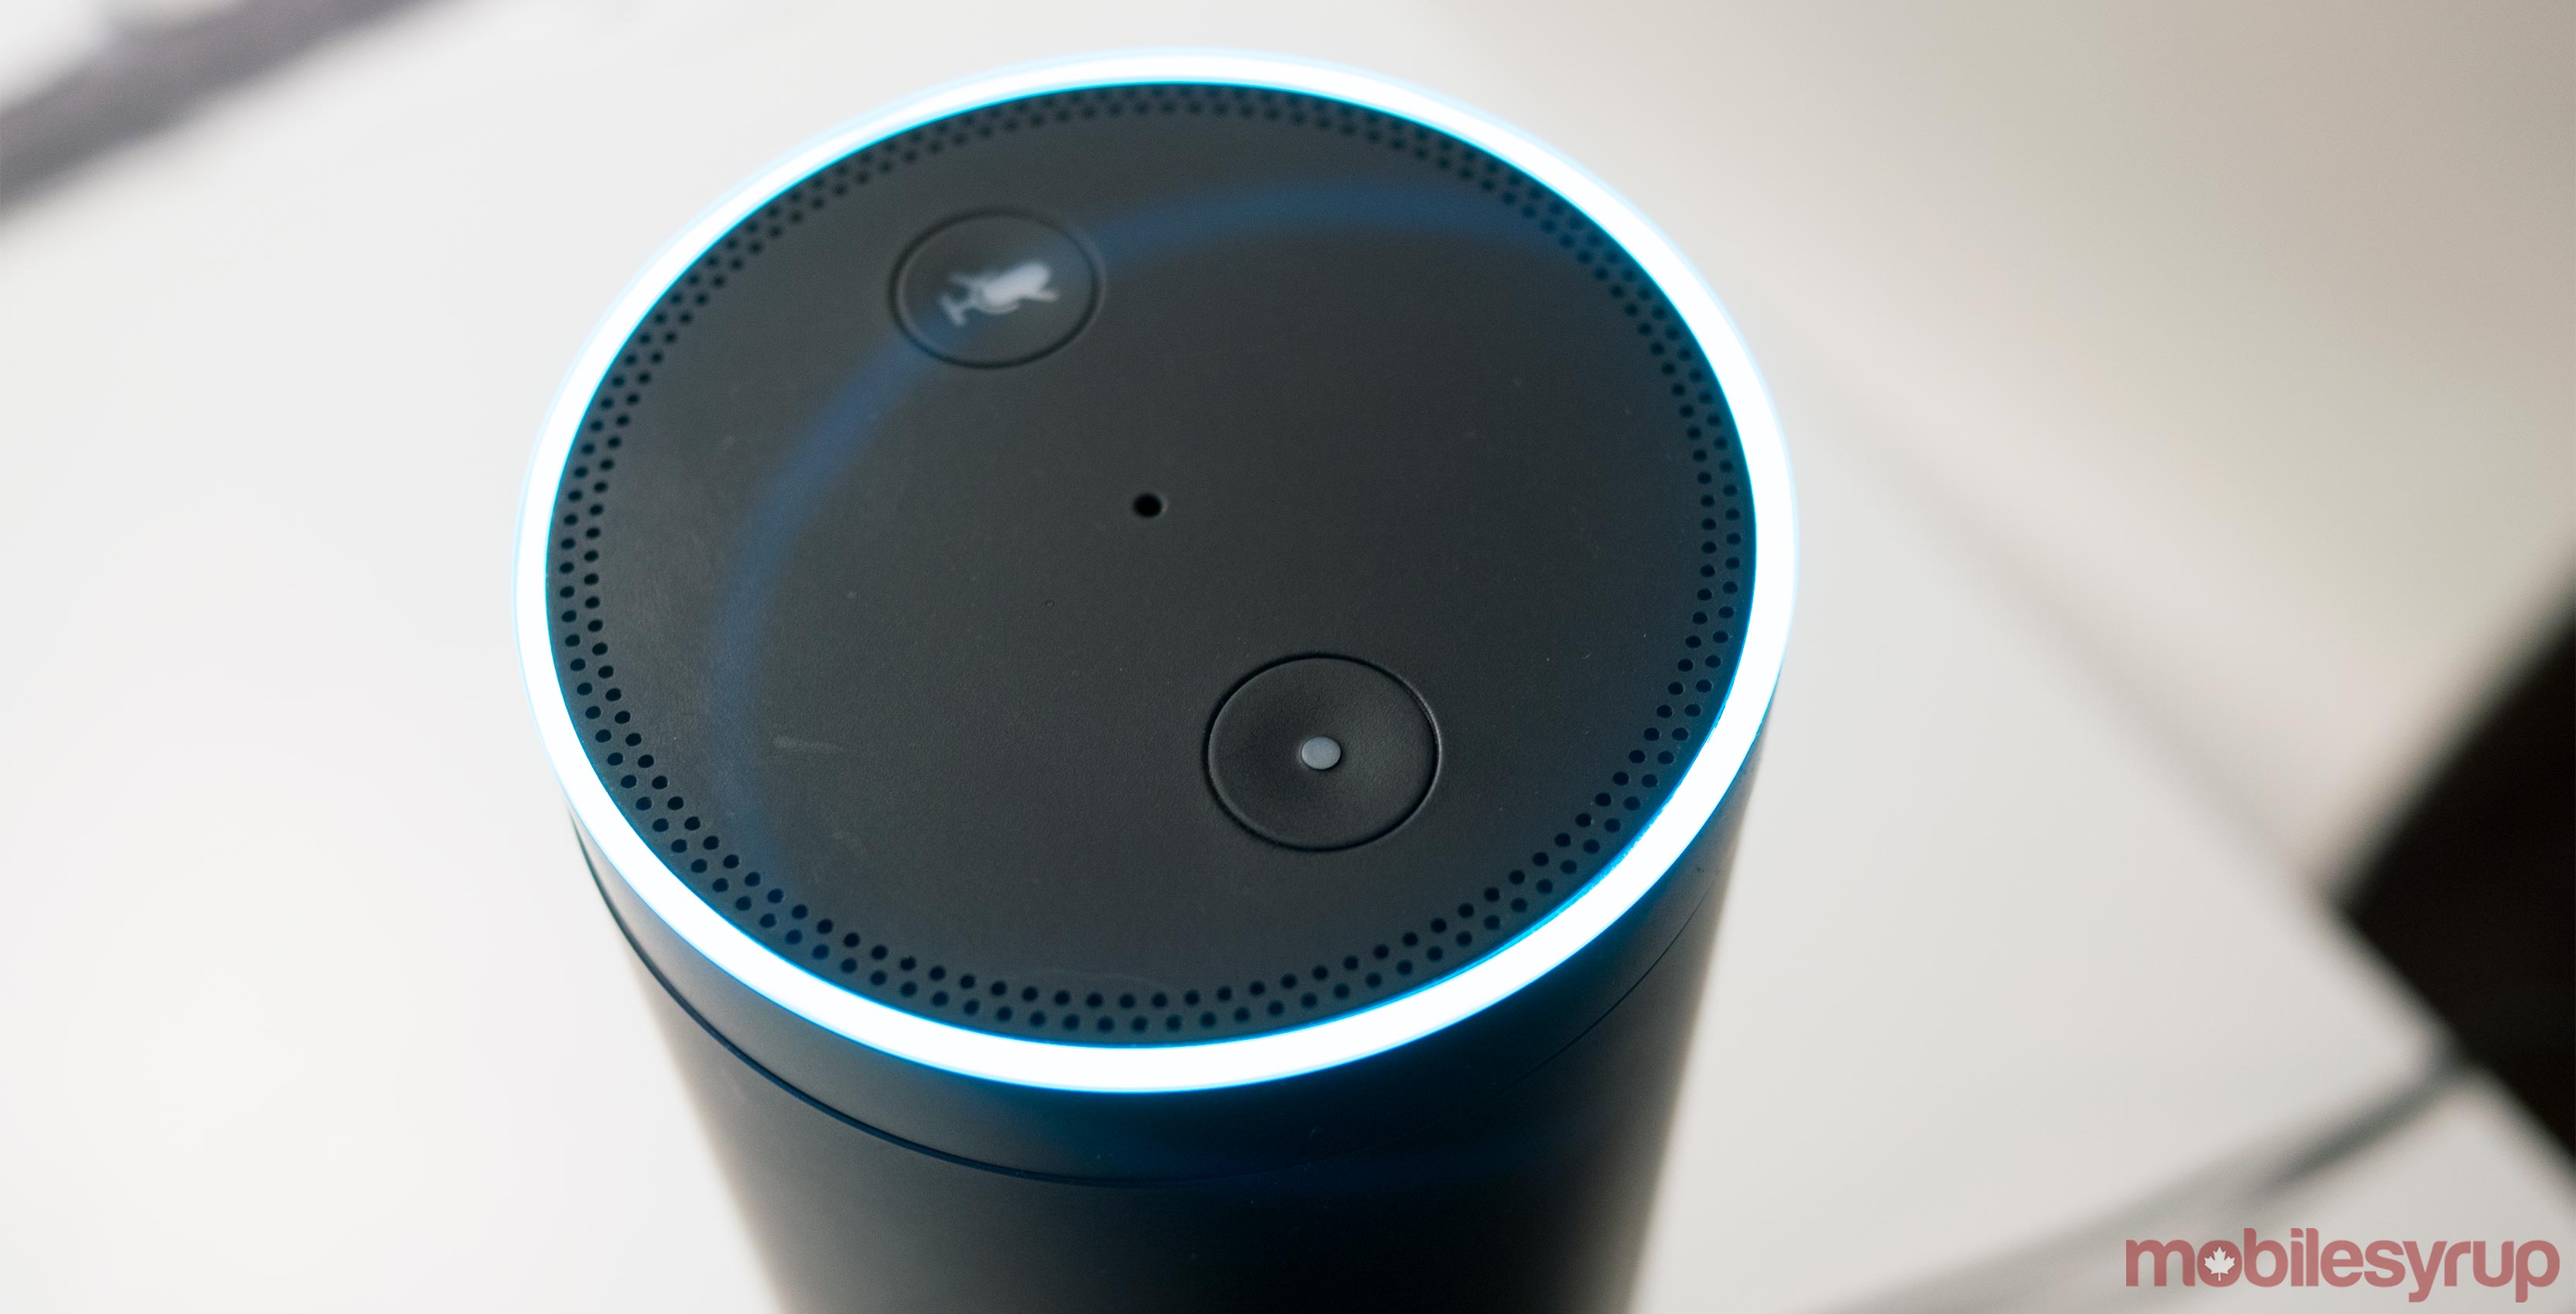 Amazon Alexa, Google Home approved malicious apps that eavesdropped, phished